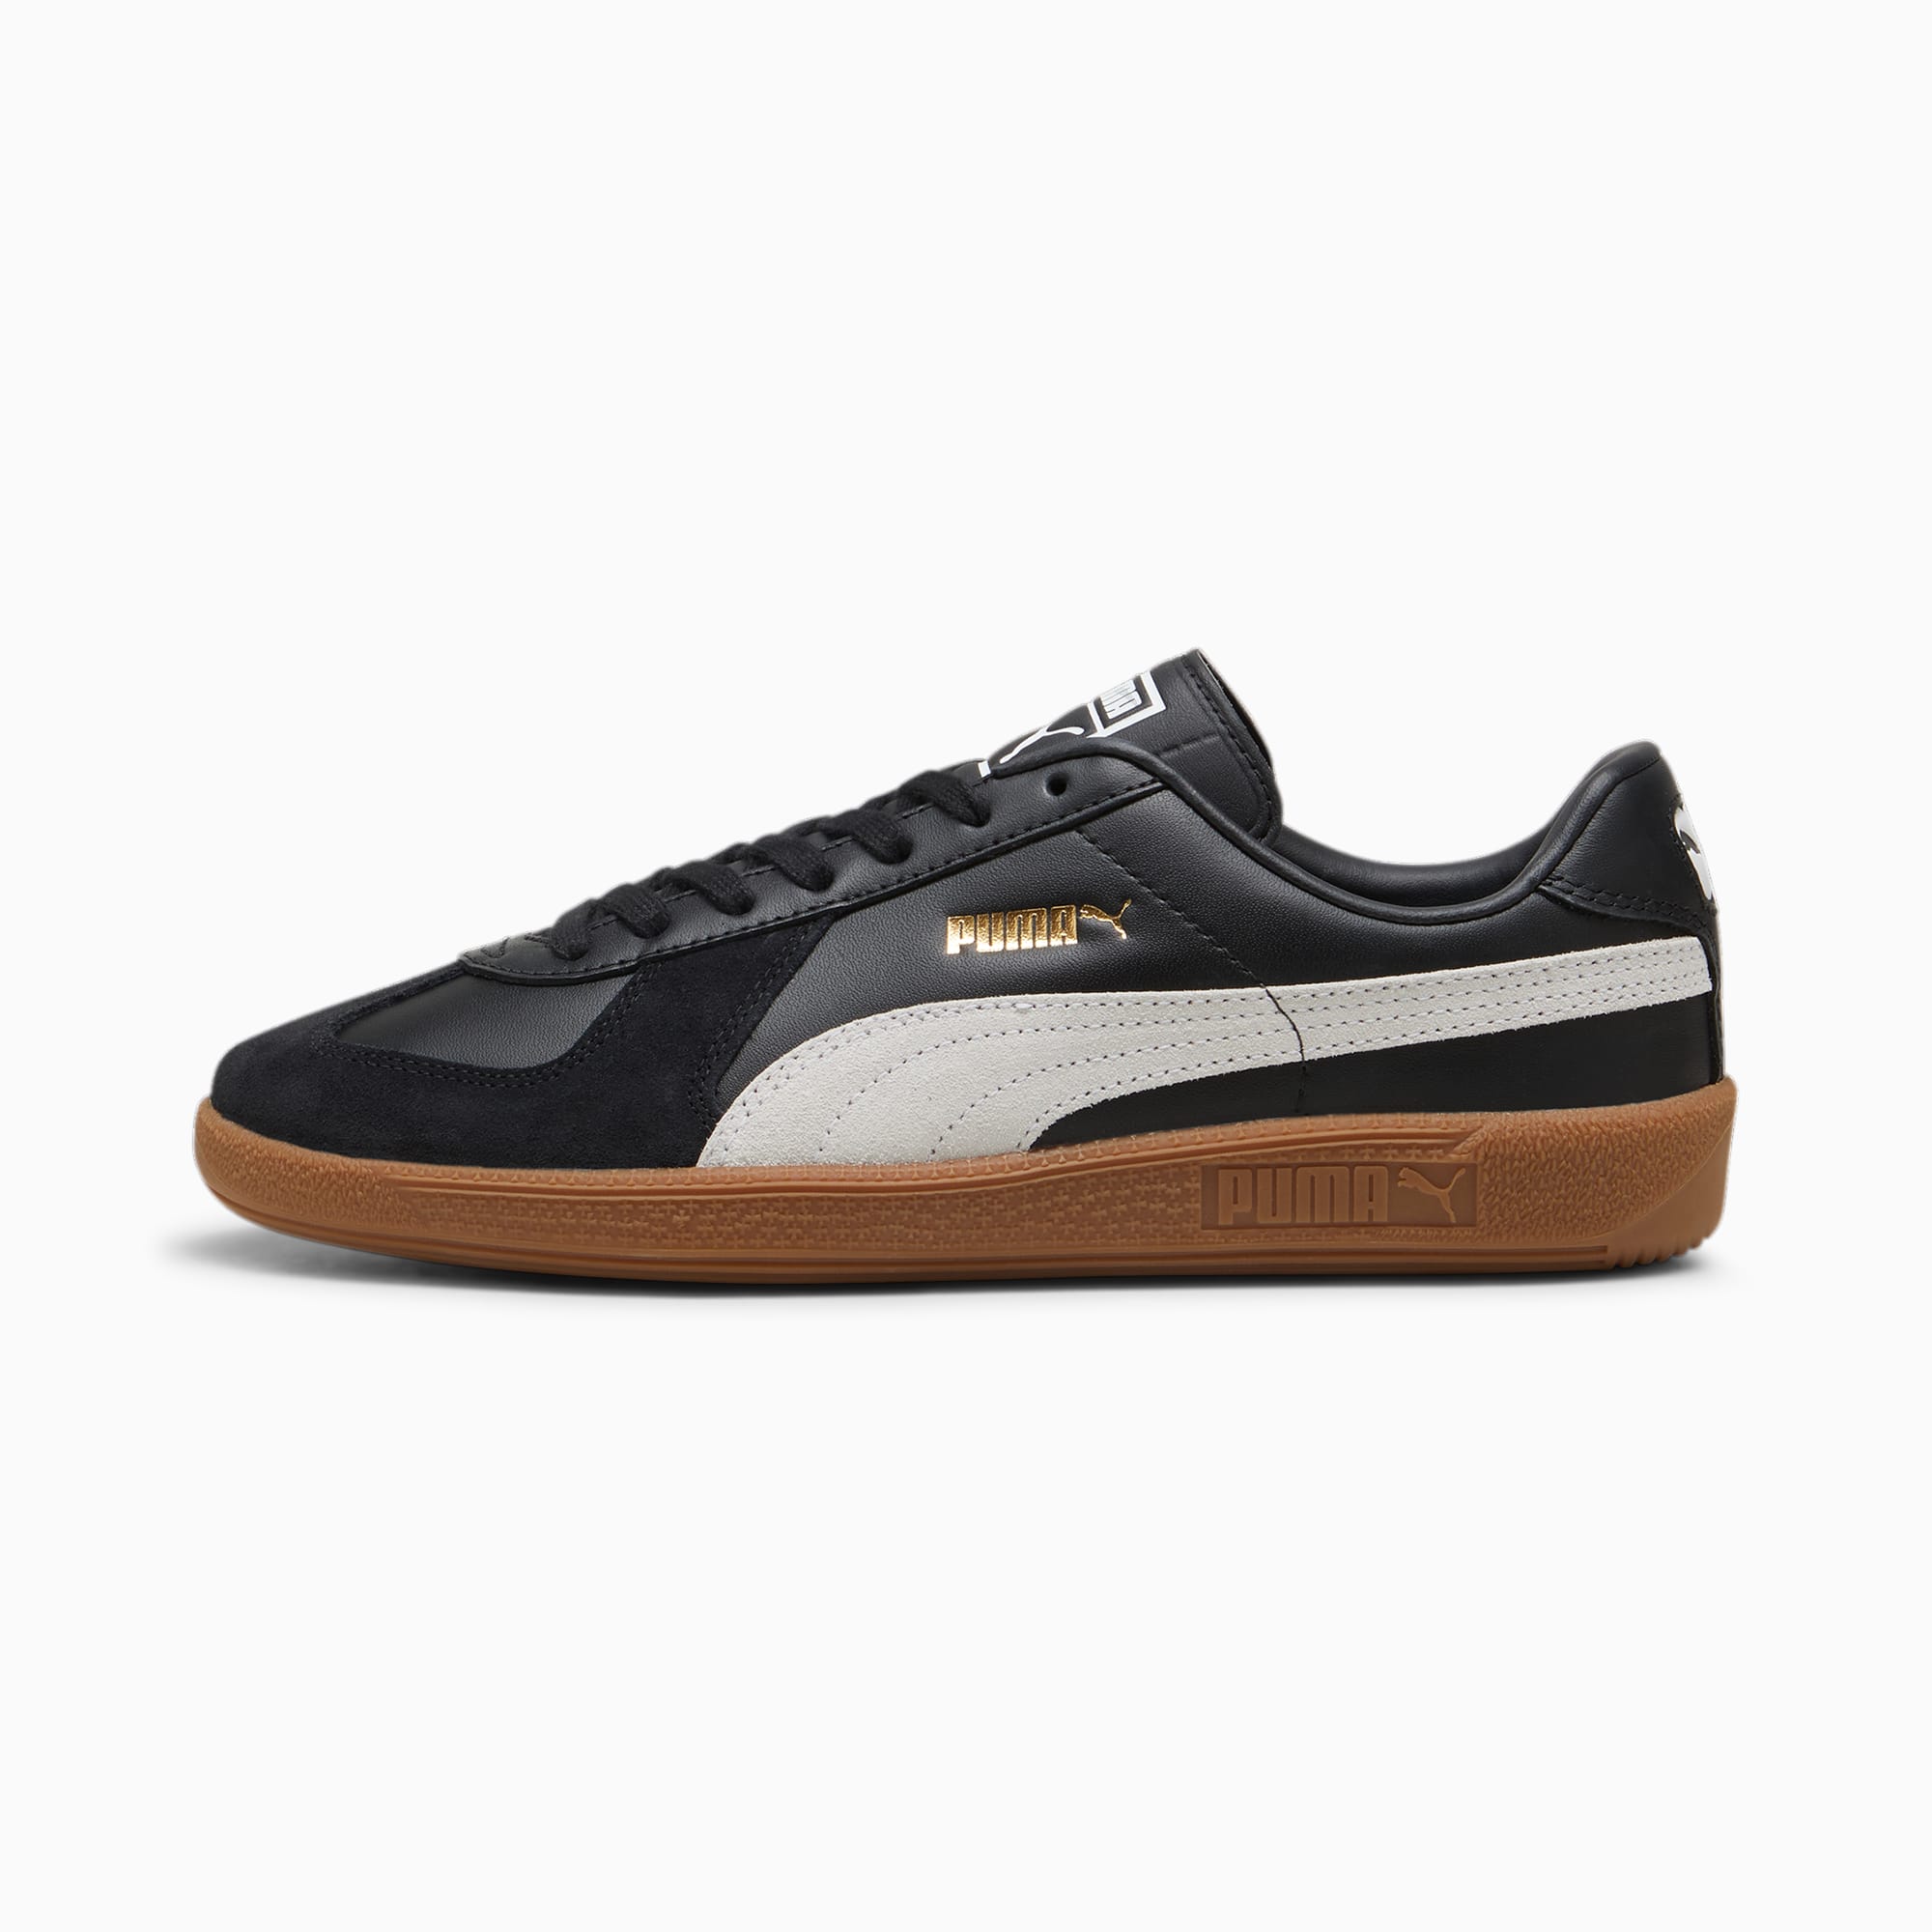 Women's PUMA Army Trainer Sneakers, Black/White/Gum, Size 35,5, Shoes